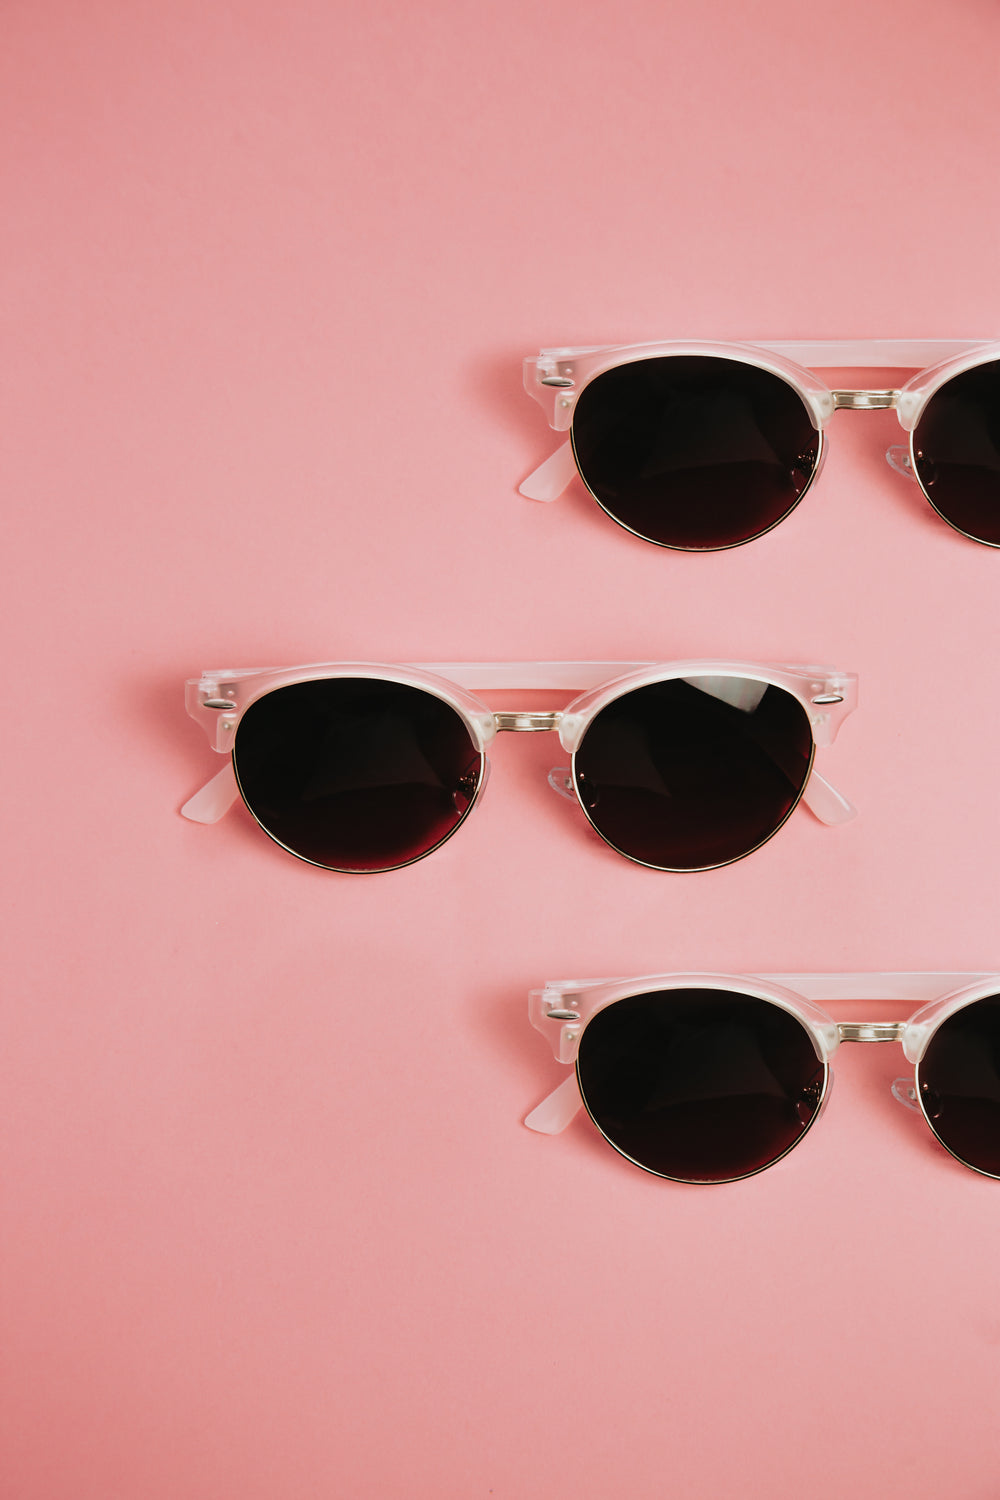 pink sunglasses on a pink surface